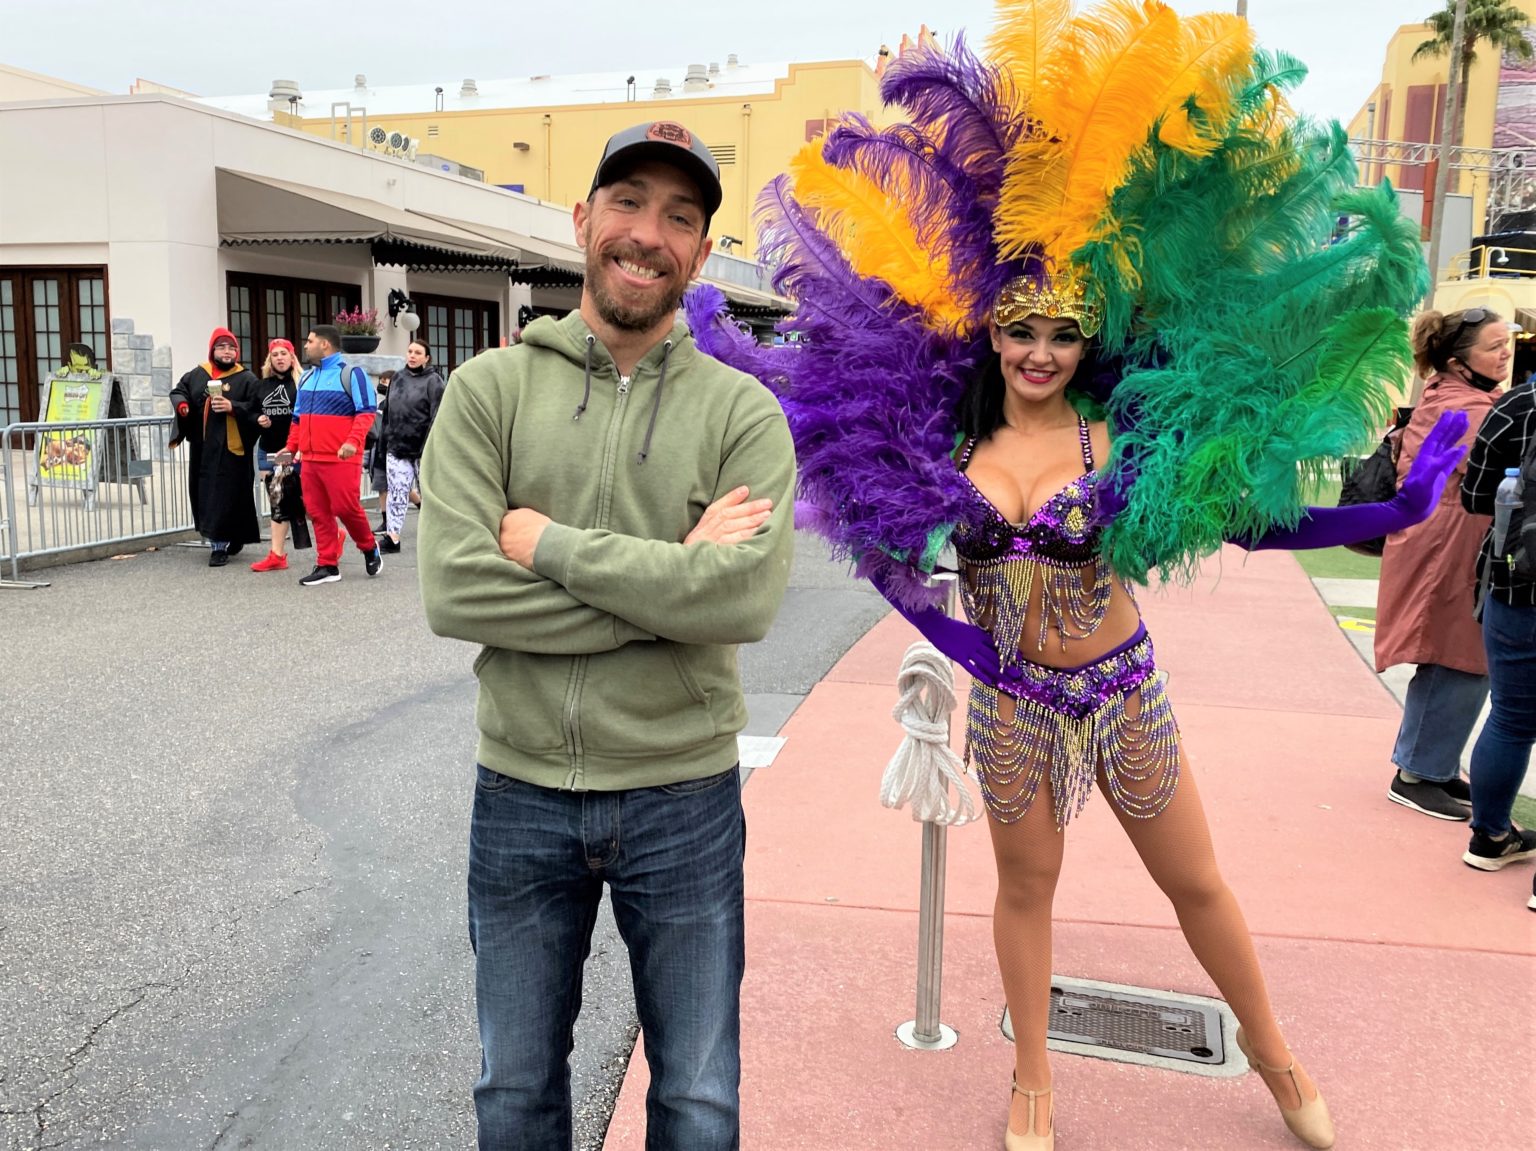 How to Have an Epic Date at Universal Orlando Mardi Gras 2023